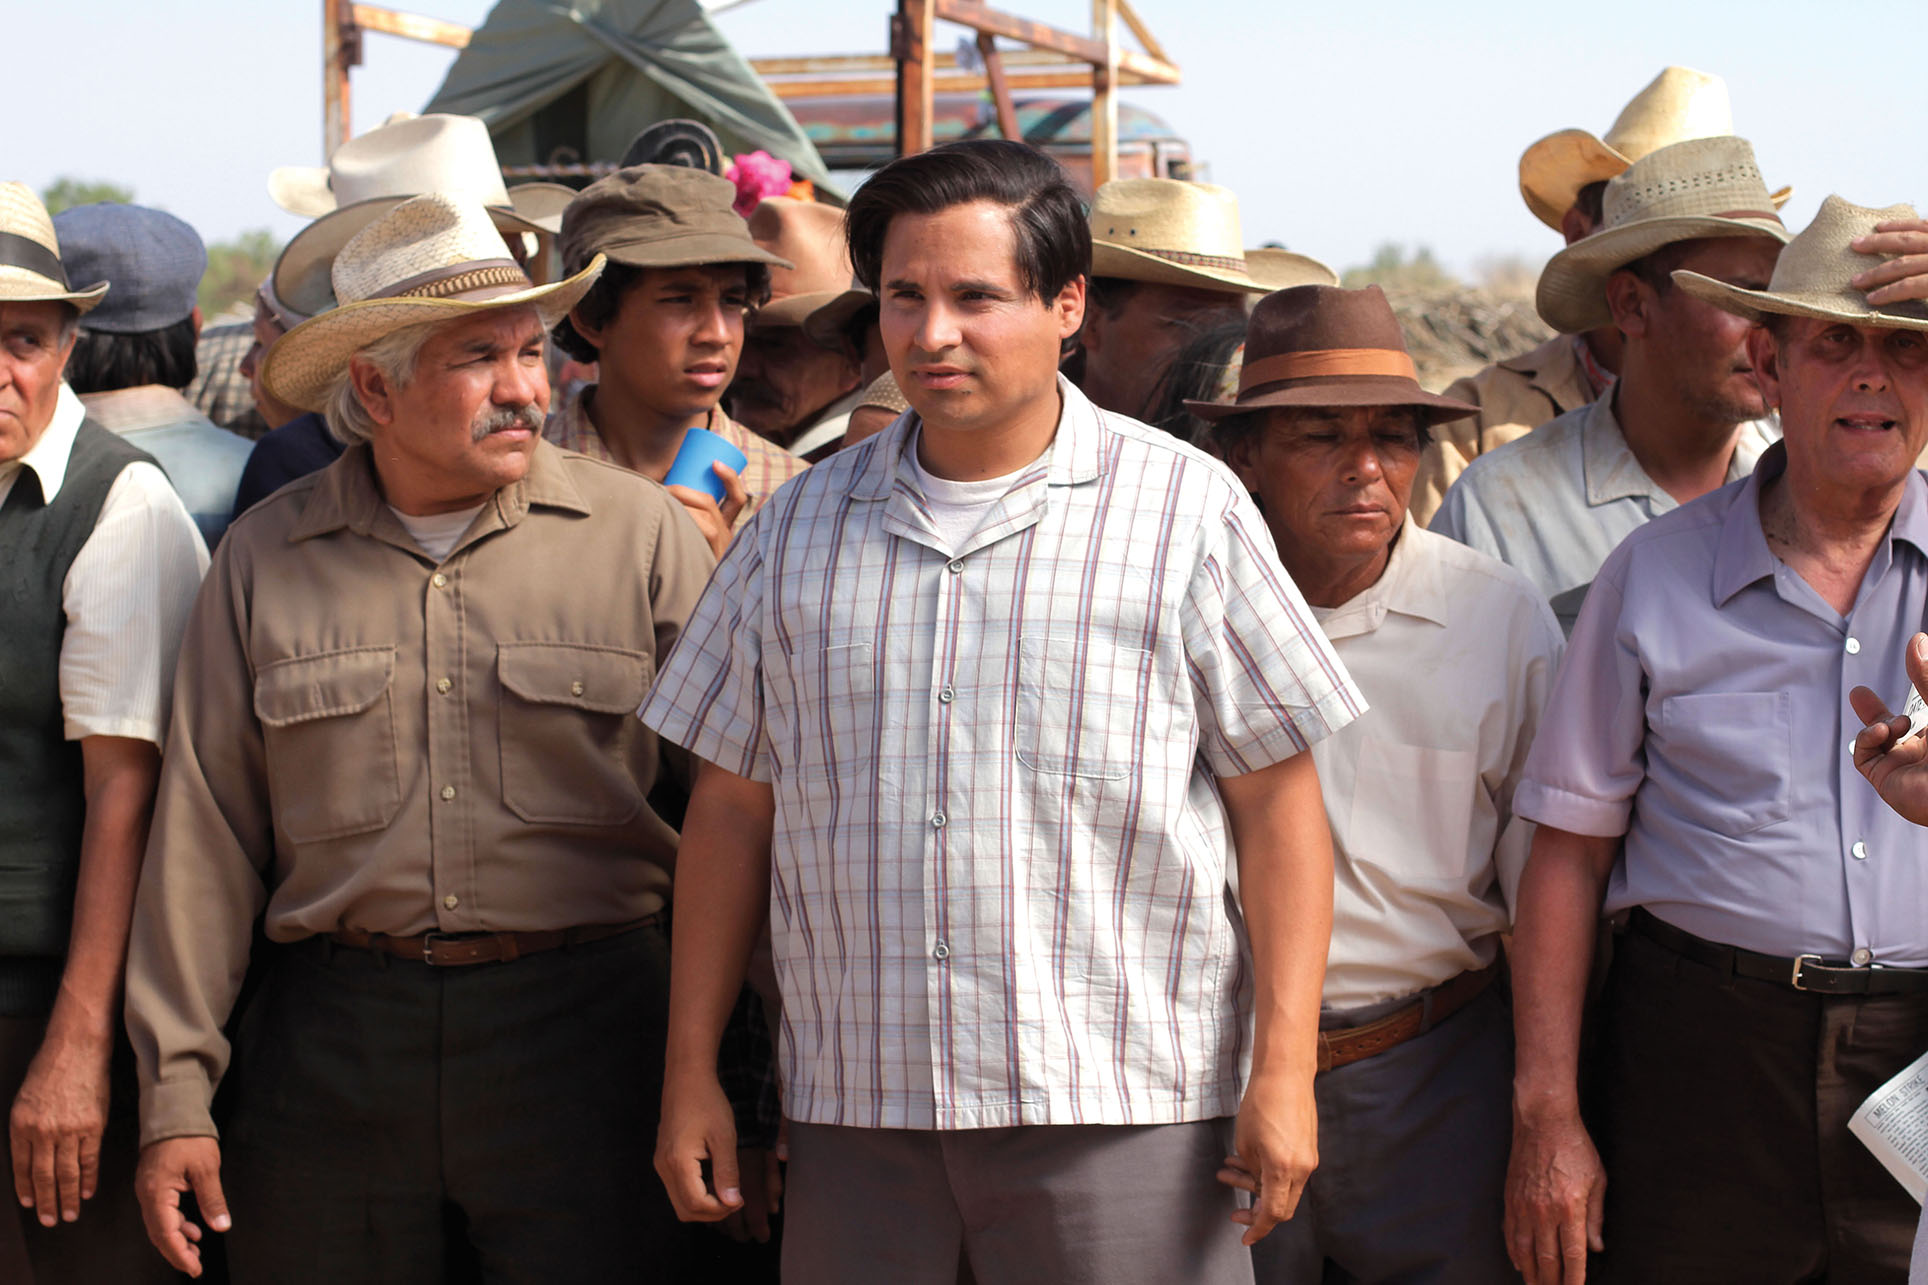 A still from the film Cesar Chavez, with Michael Peña playing the lead role. (Photo courtesy of Canana Films.)